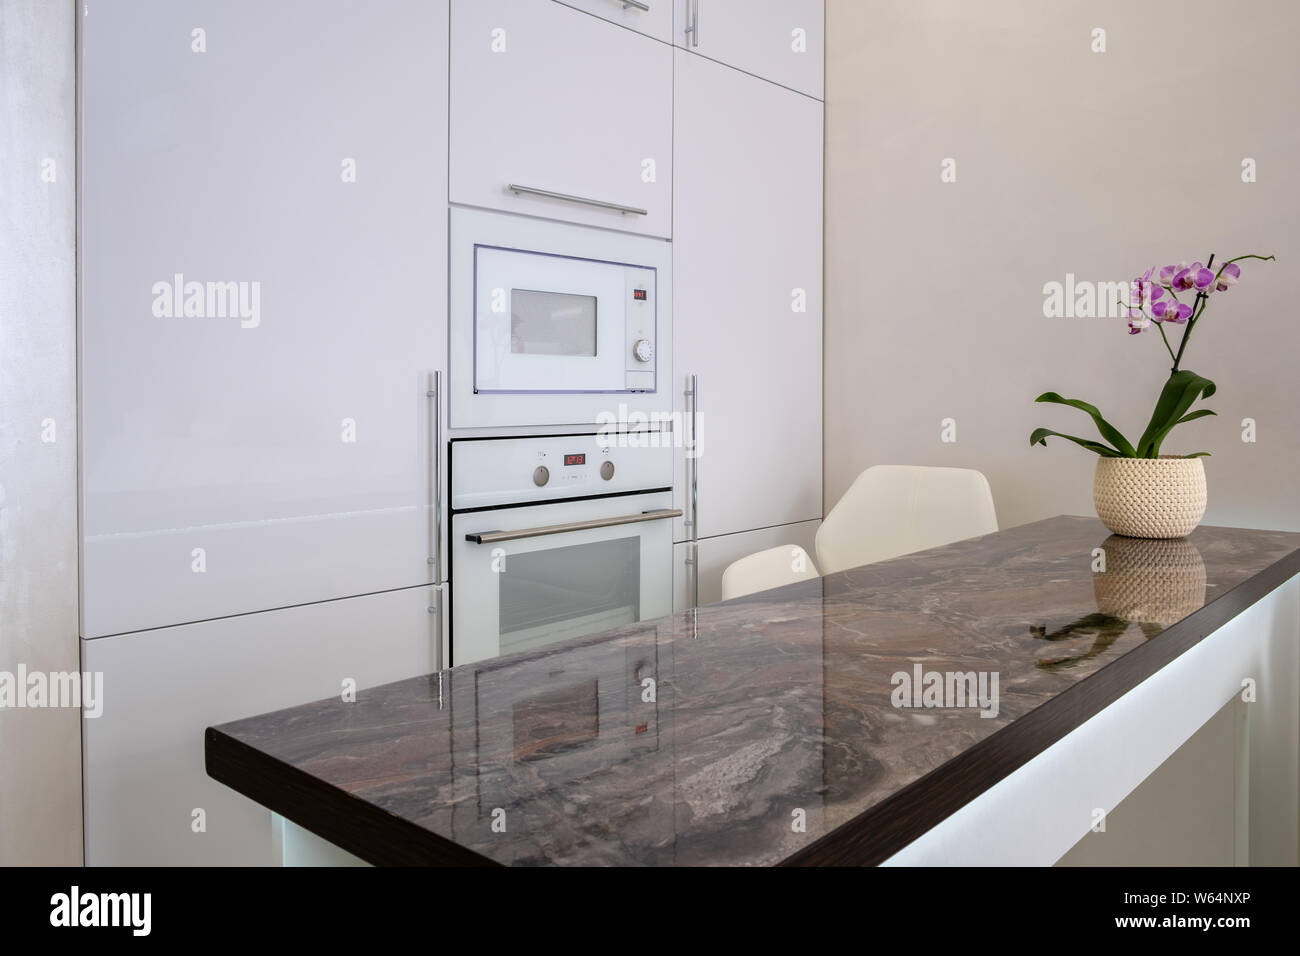 Footage of built in modules in kitchen, Interior shot. built-in microwave and oven. Interior of white modern kitchen Stock Photo